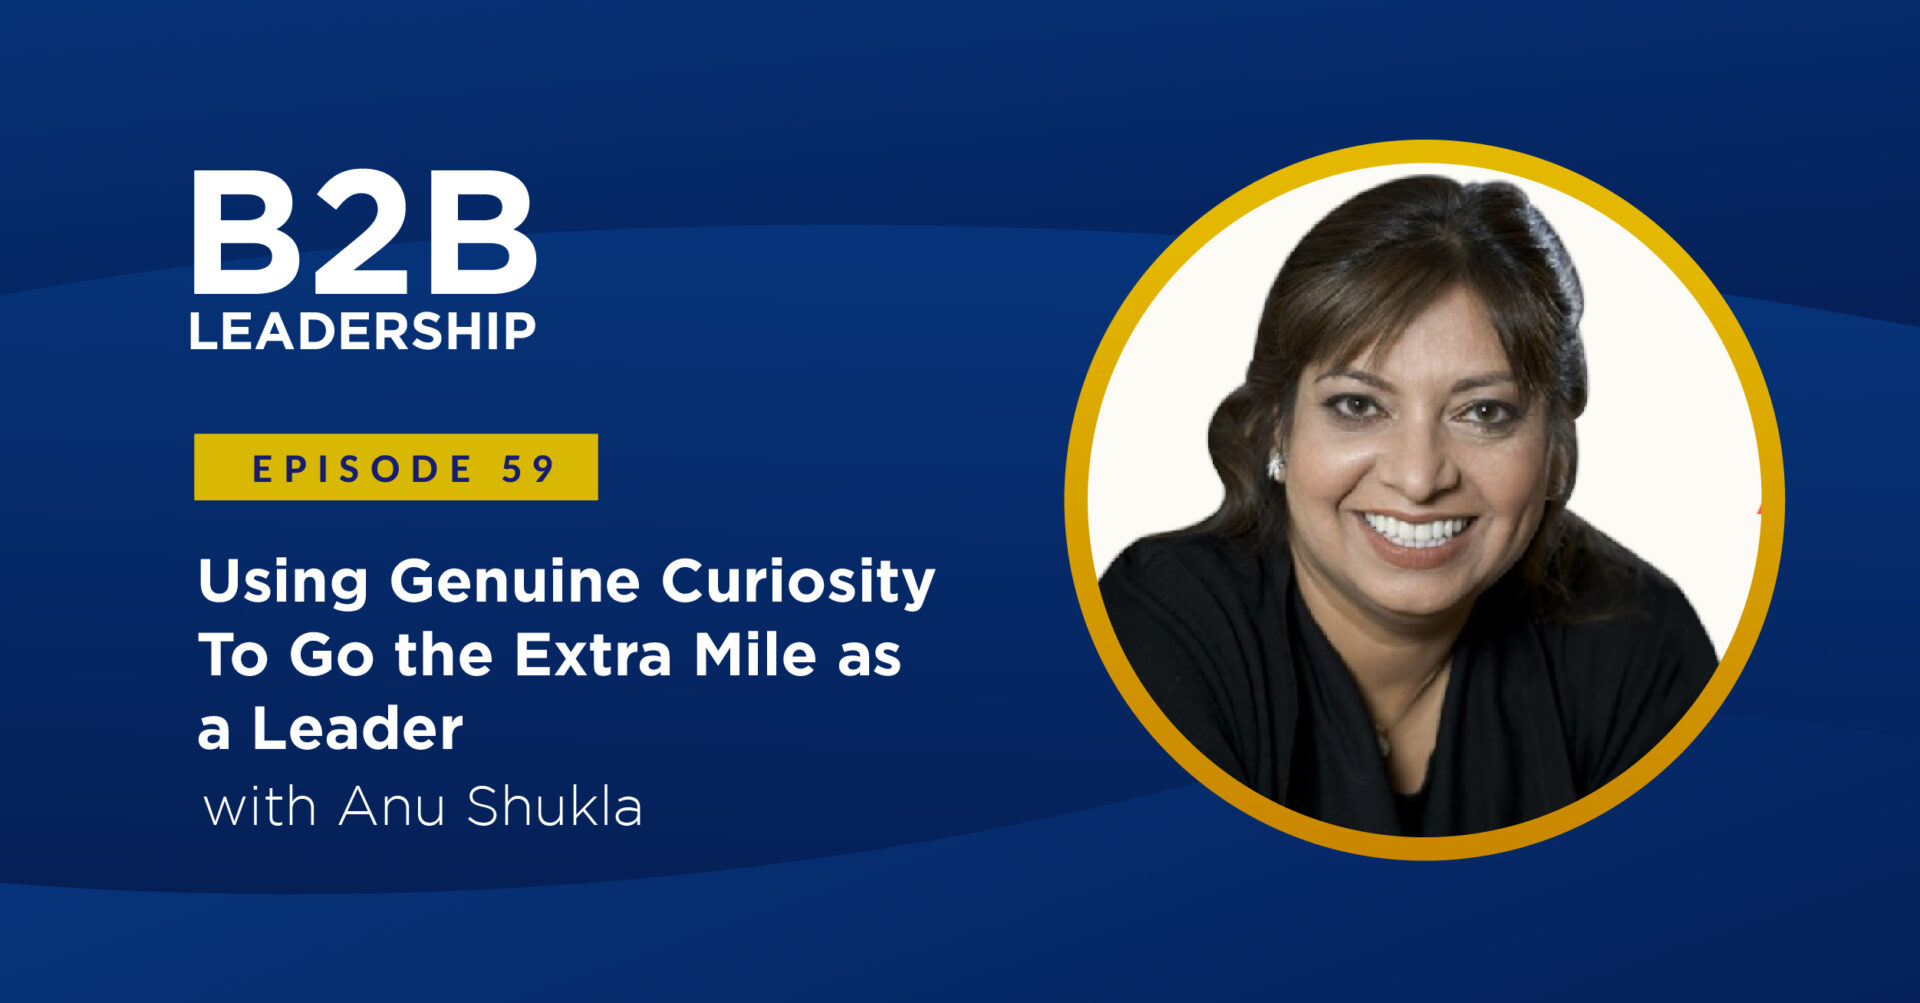 Using Genuine Curiosity To Go the Extra Mile as a Leader with Anu Shukla